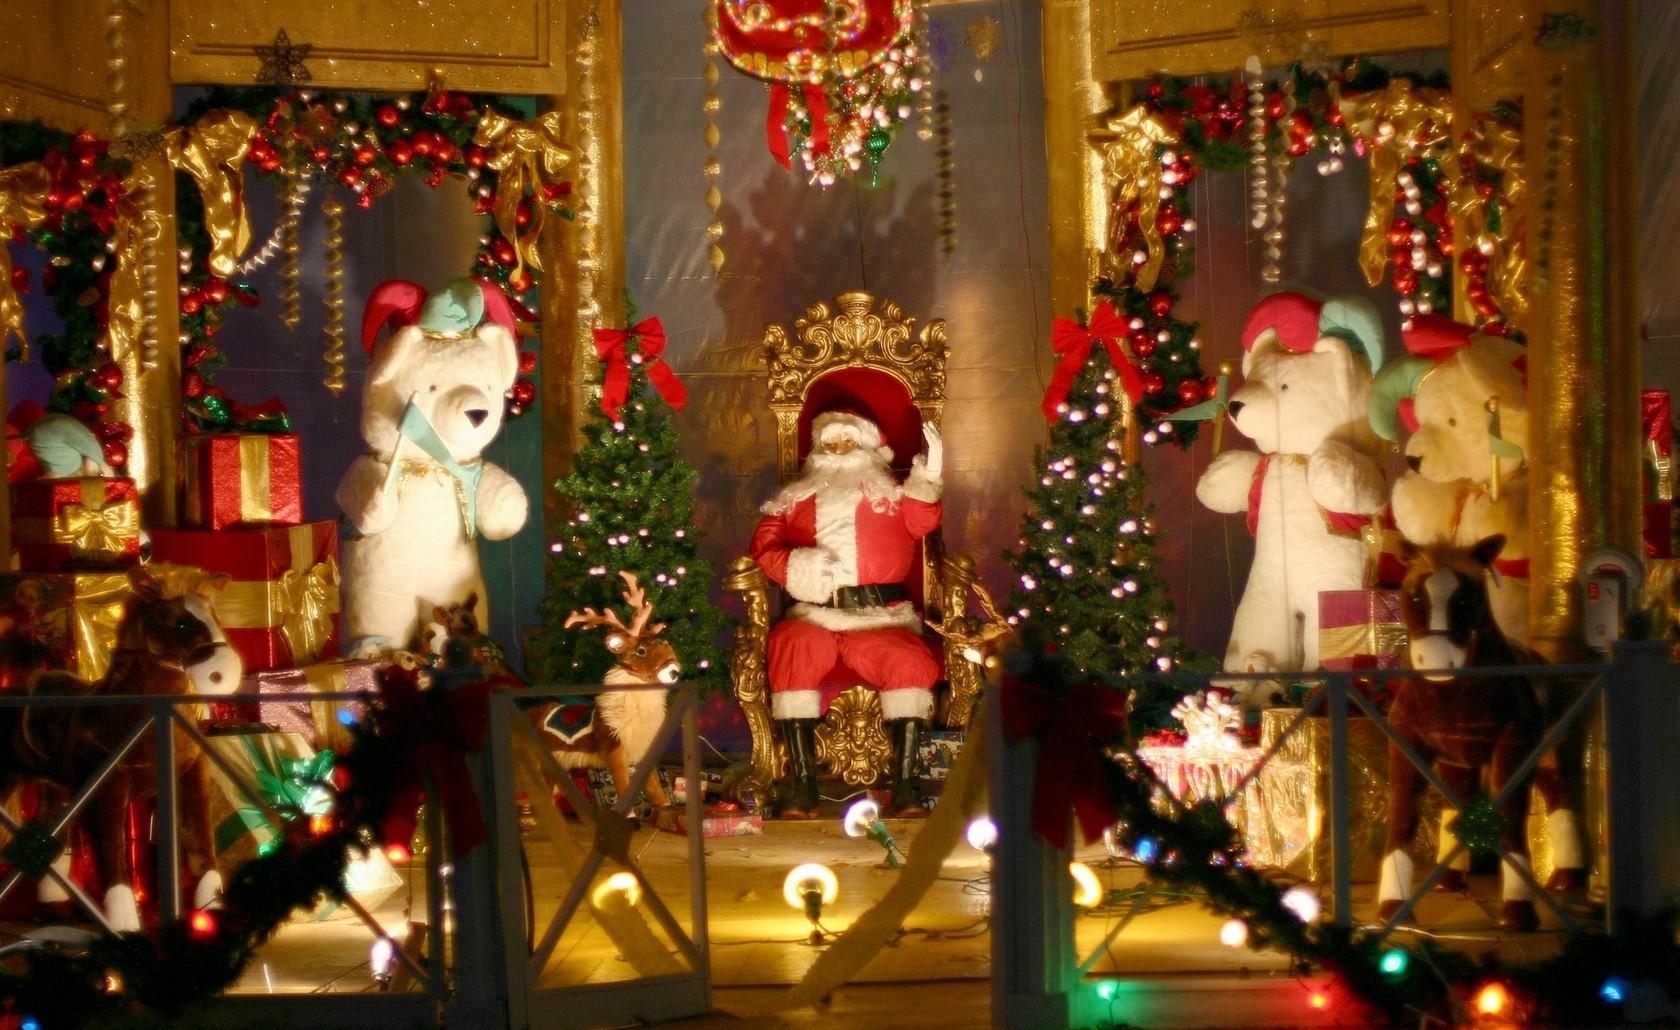 enclosure, decorations, presents, holidays, santa claus, toys, fir trees, bears, christmas, armchair, fencing, gifts Full HD